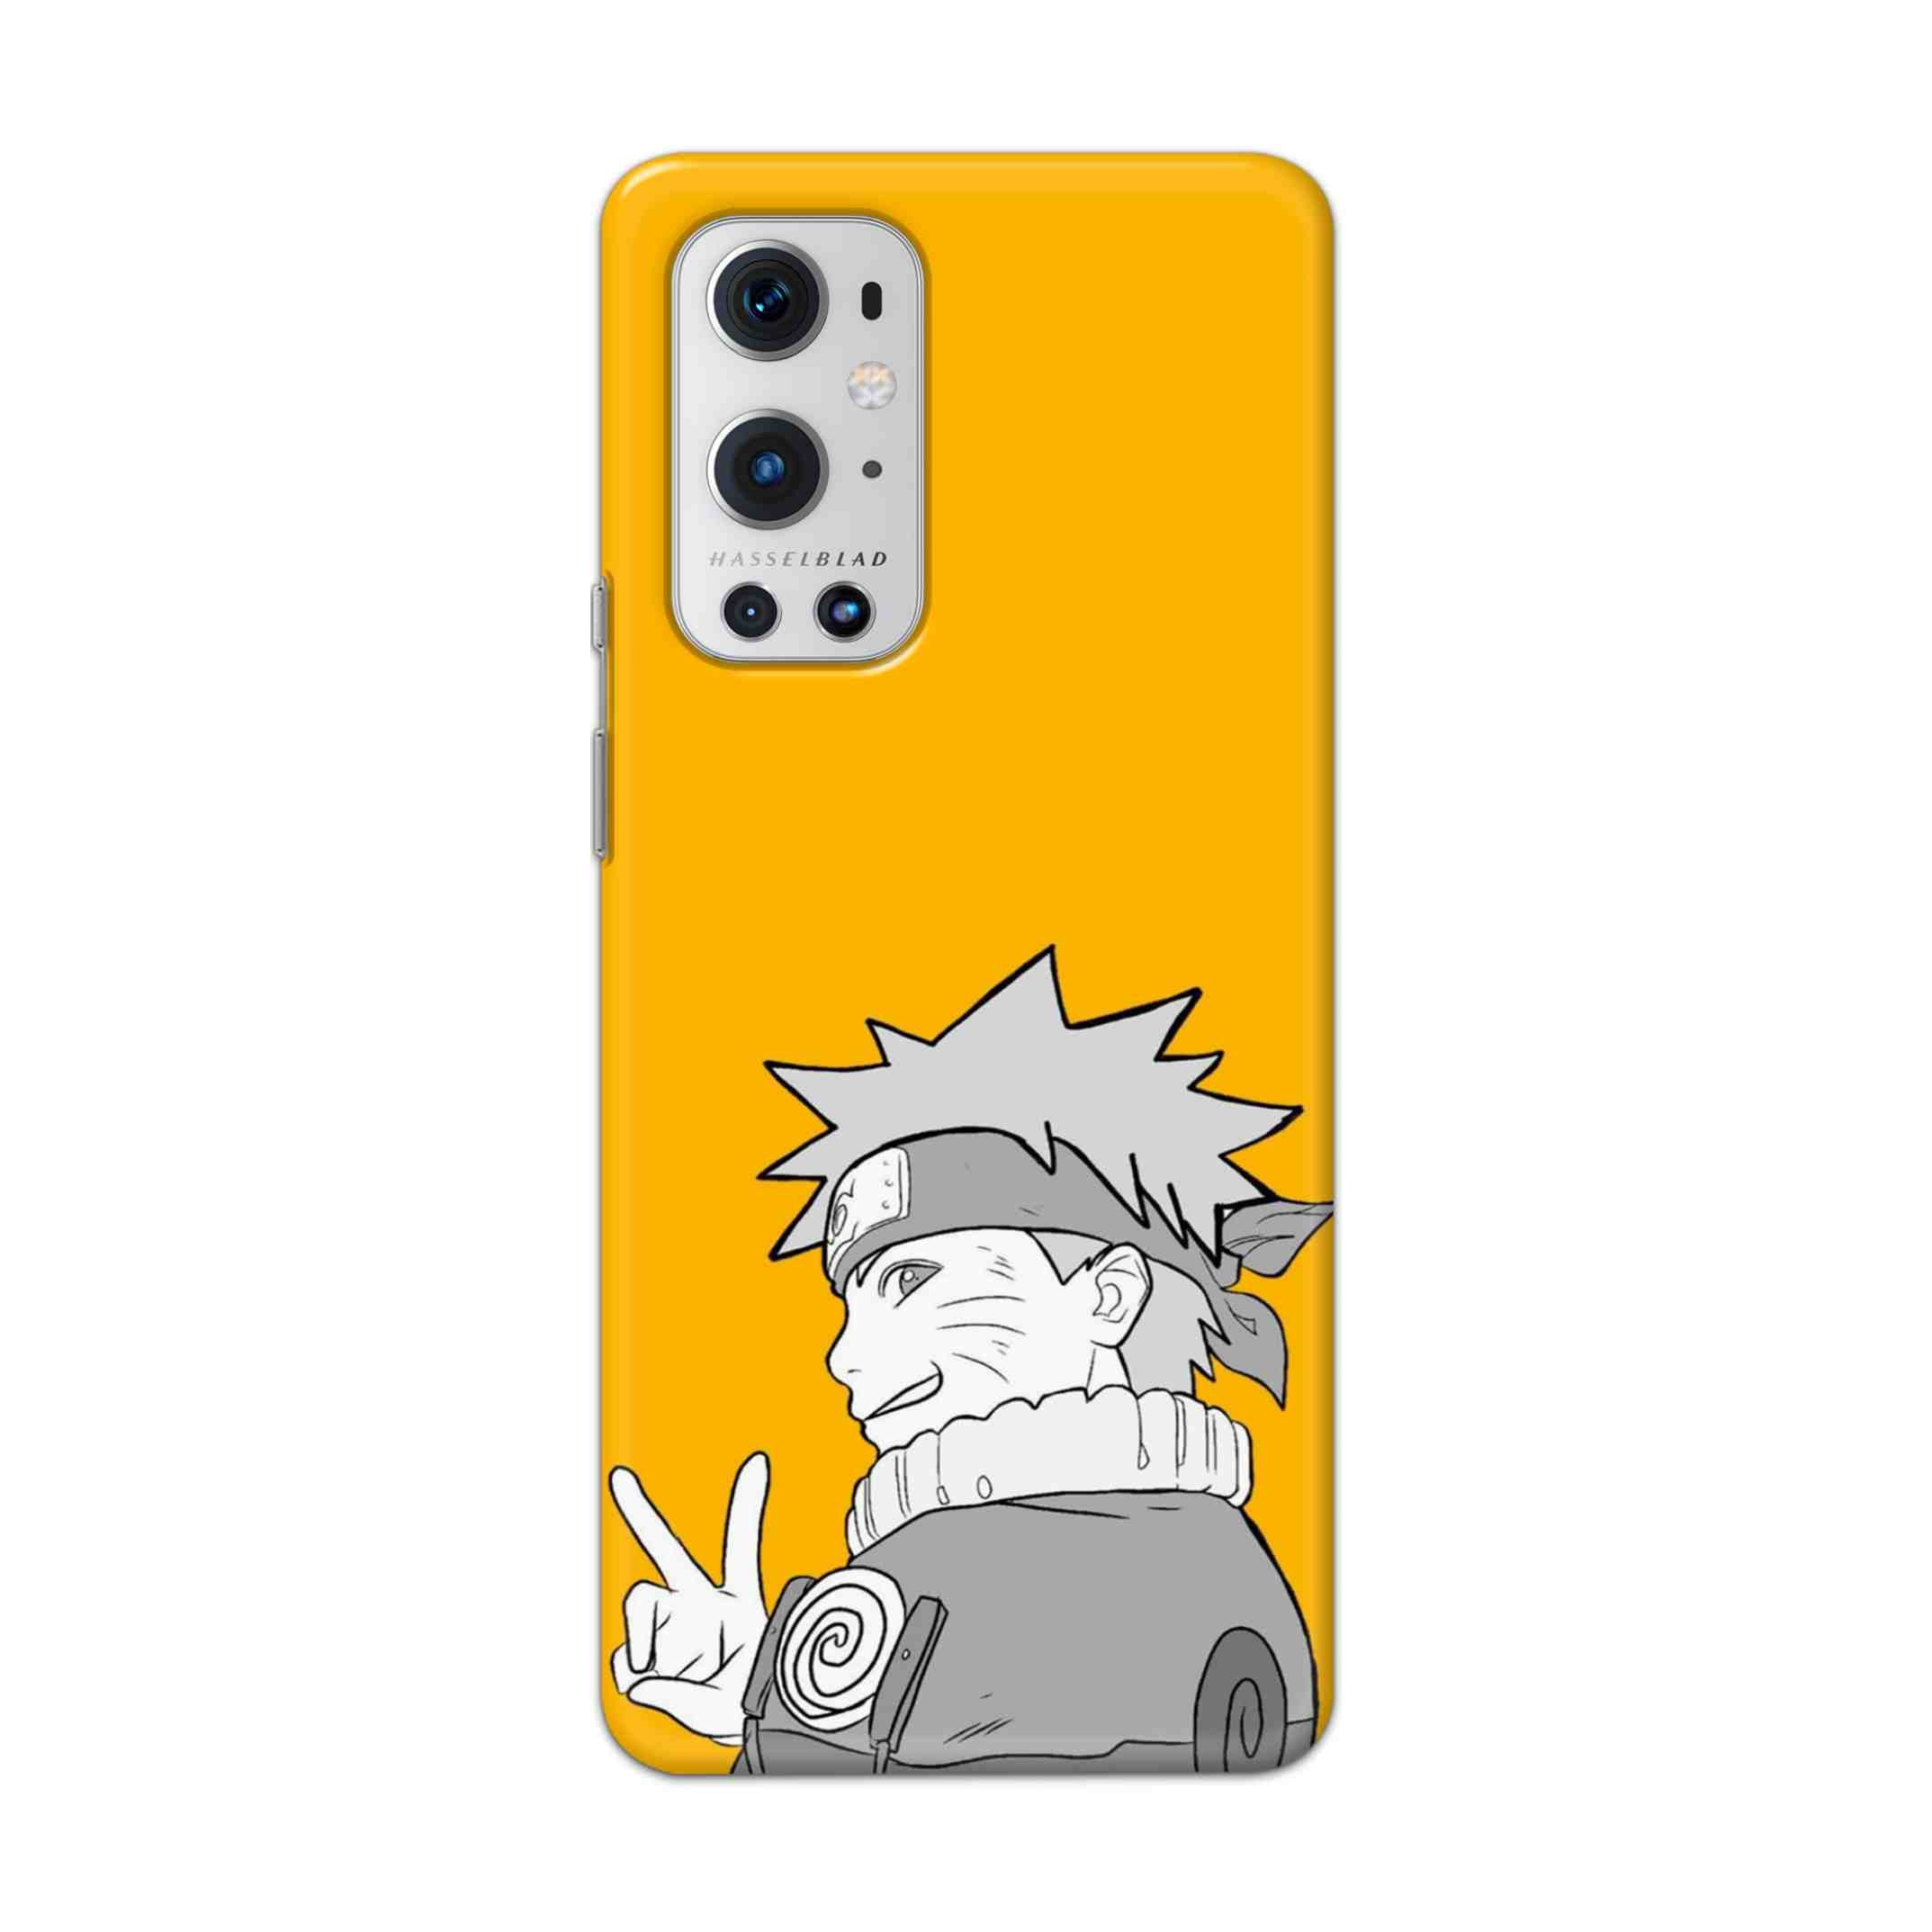 Buy White Naruto Hard Back Mobile Phone Case Cover For OnePlus 9 Pro Online